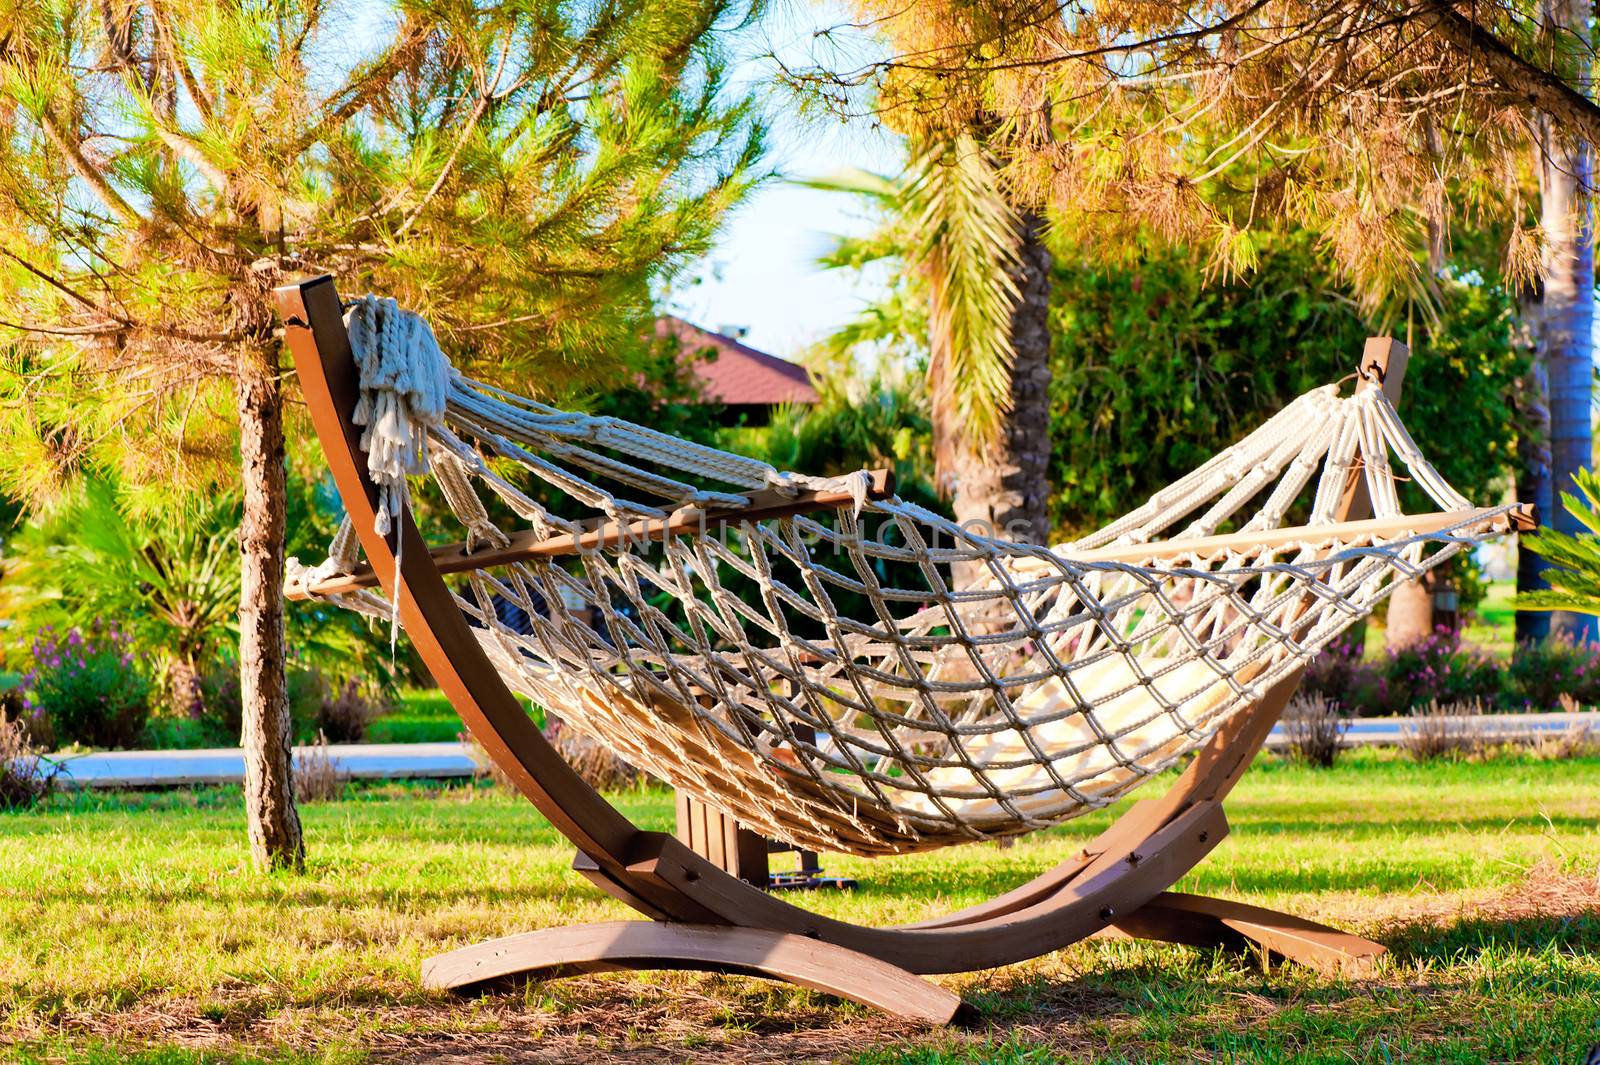 Hammock to relax in the tropical garden by kosmsos111